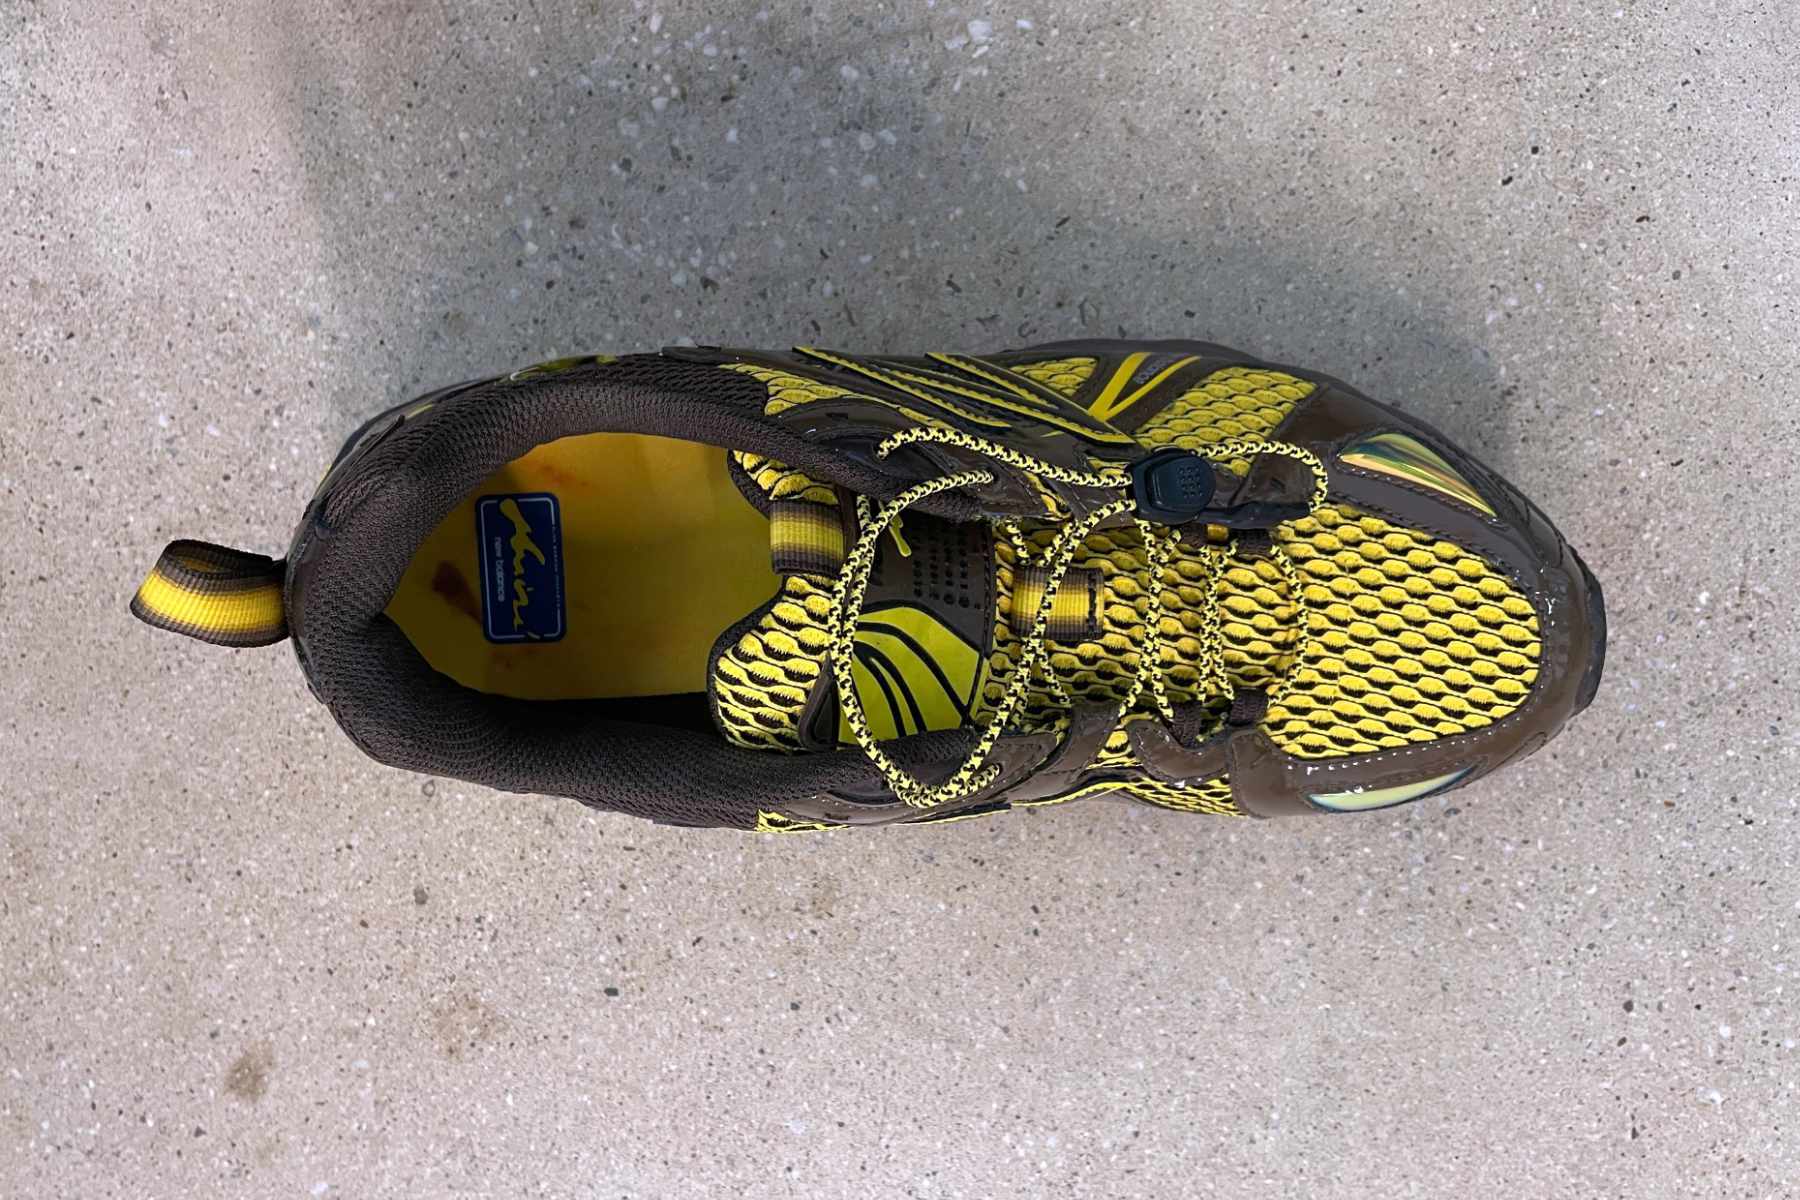 Amine's New Balance 610 shoe, "The Mooz," in brown and yellow colors photographed from the top-down